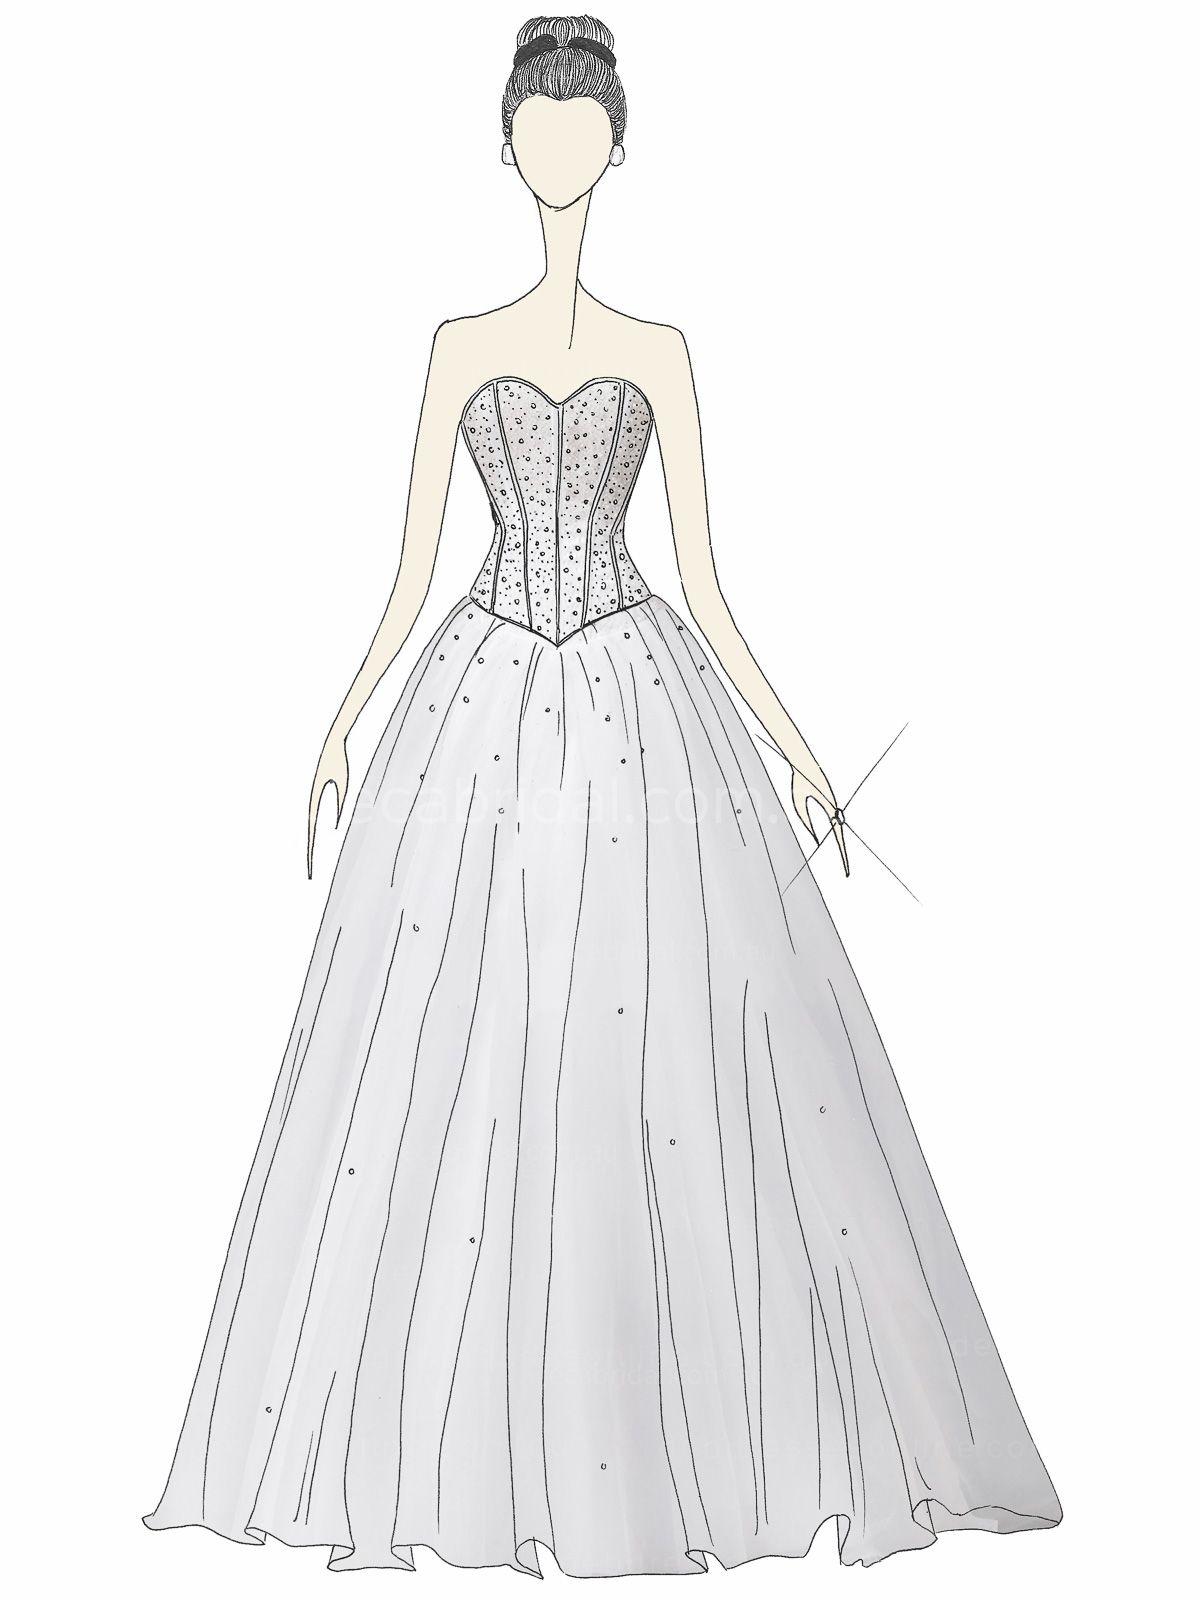 Dress Design Sketch at PaintingValley.com | Explore collection of Dress ...